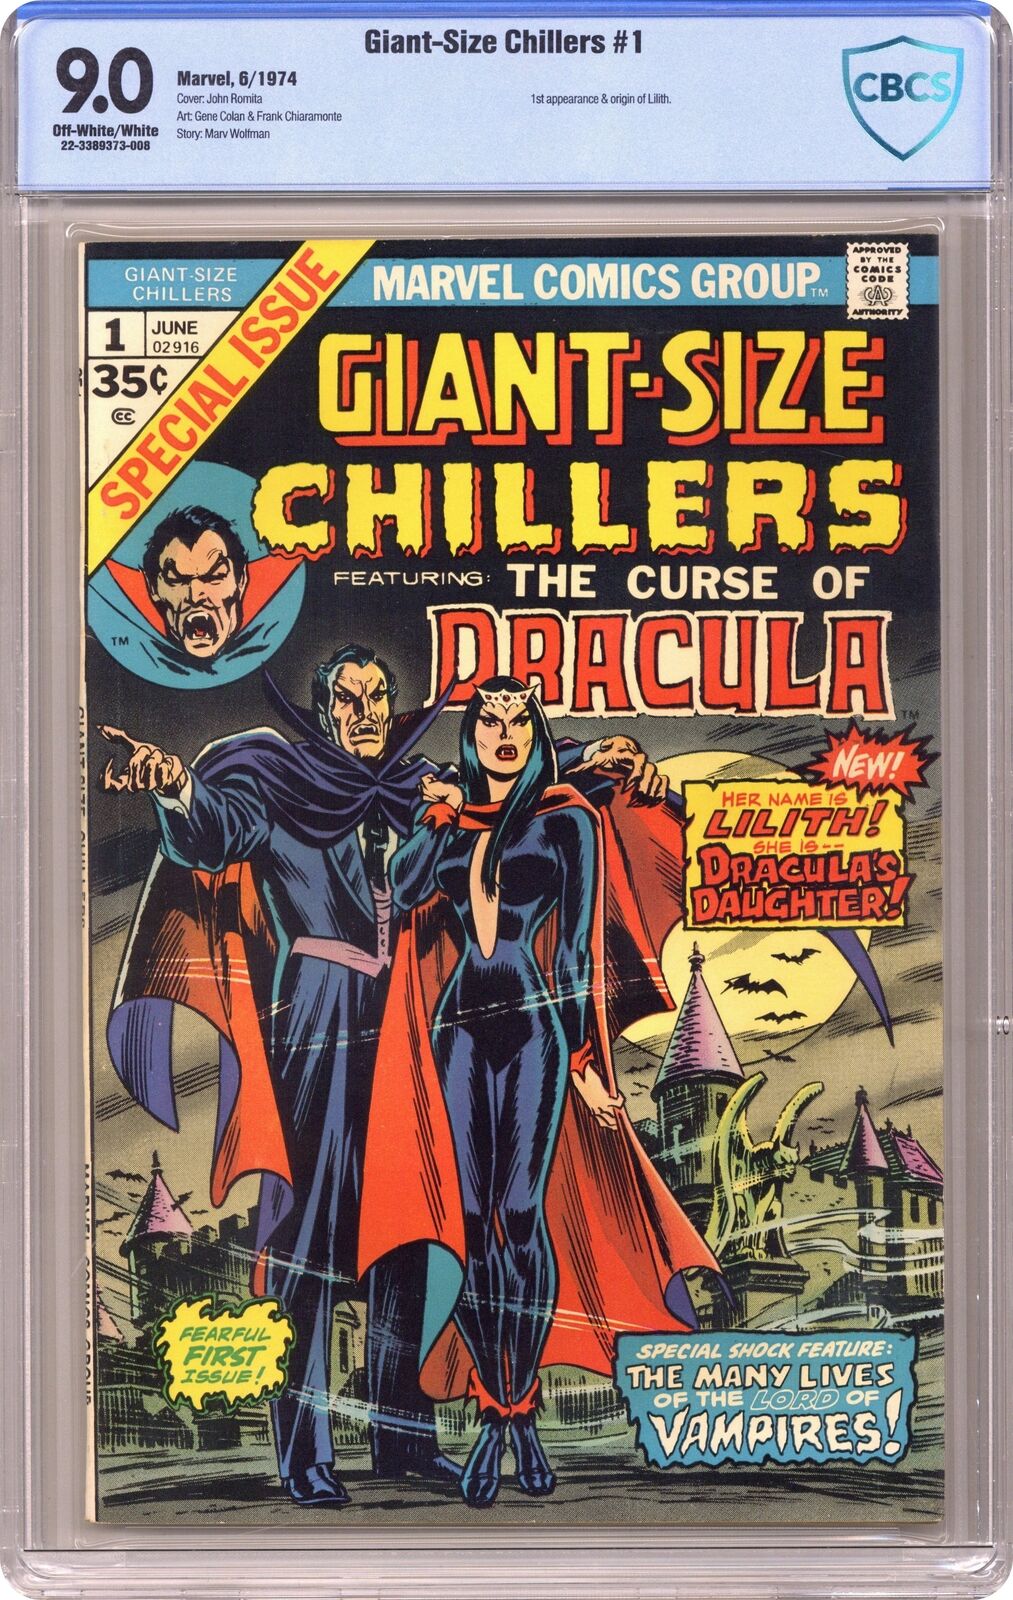 Giant Size Chillers Featuring Dracula #1 CBCS 9.0 1974 22-3389373-008